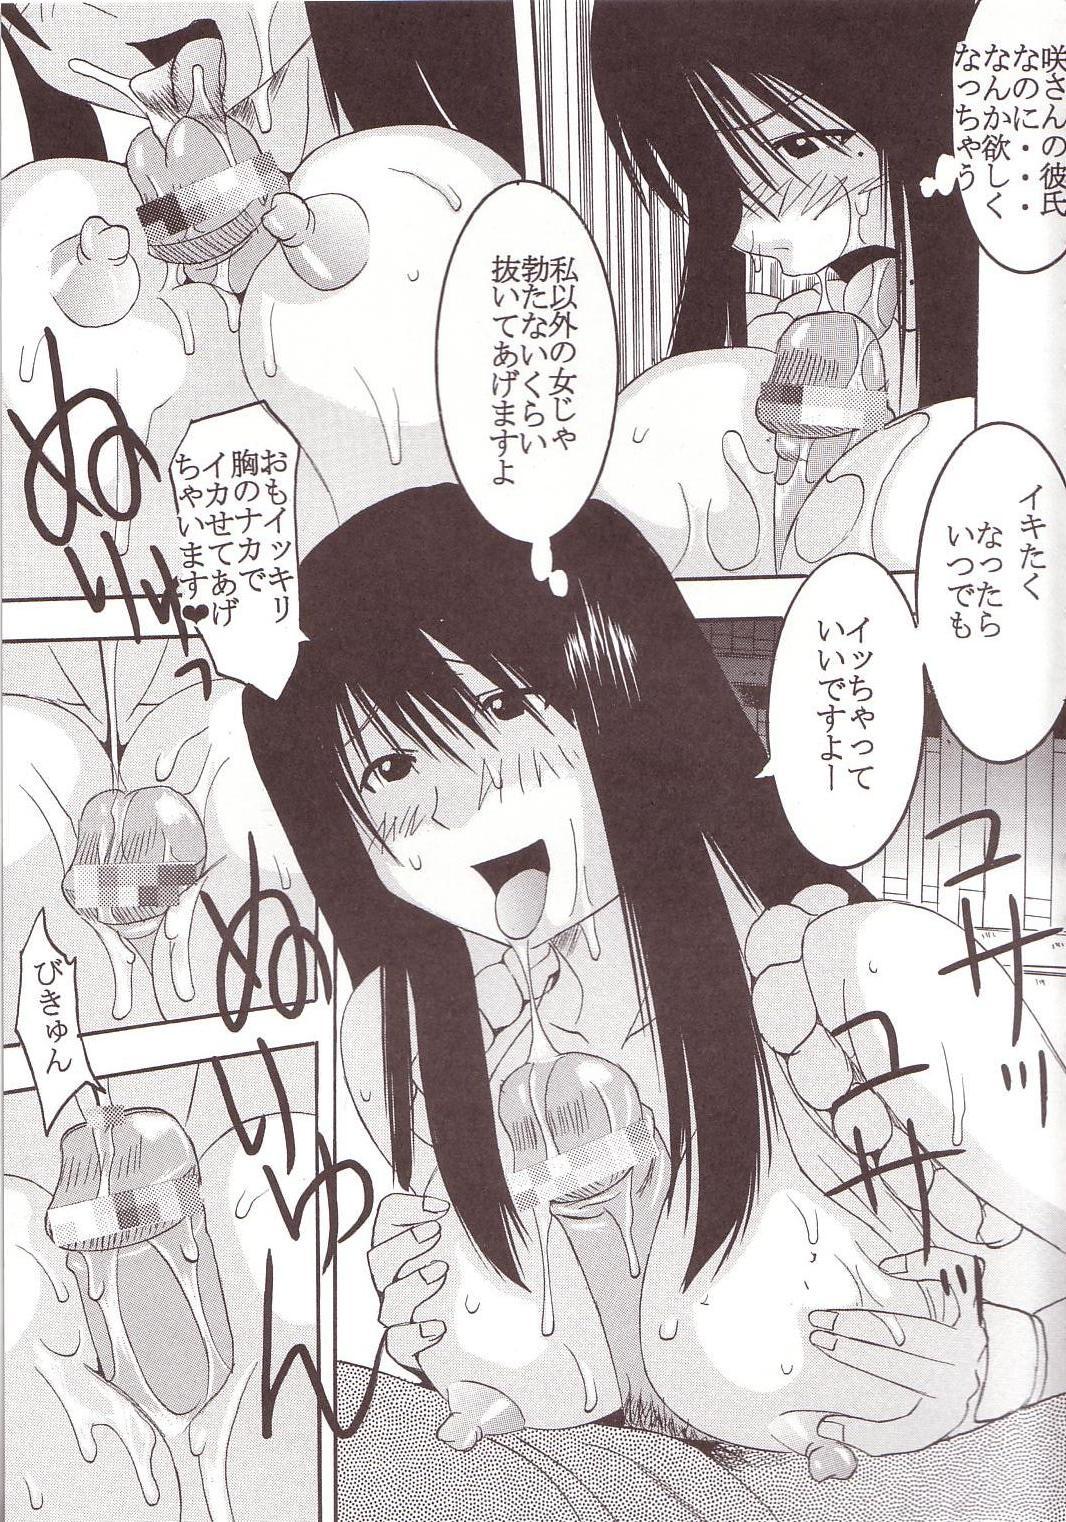 Erotic GenCKen 1 - King of fighters Genshiken Softcore - Page 10